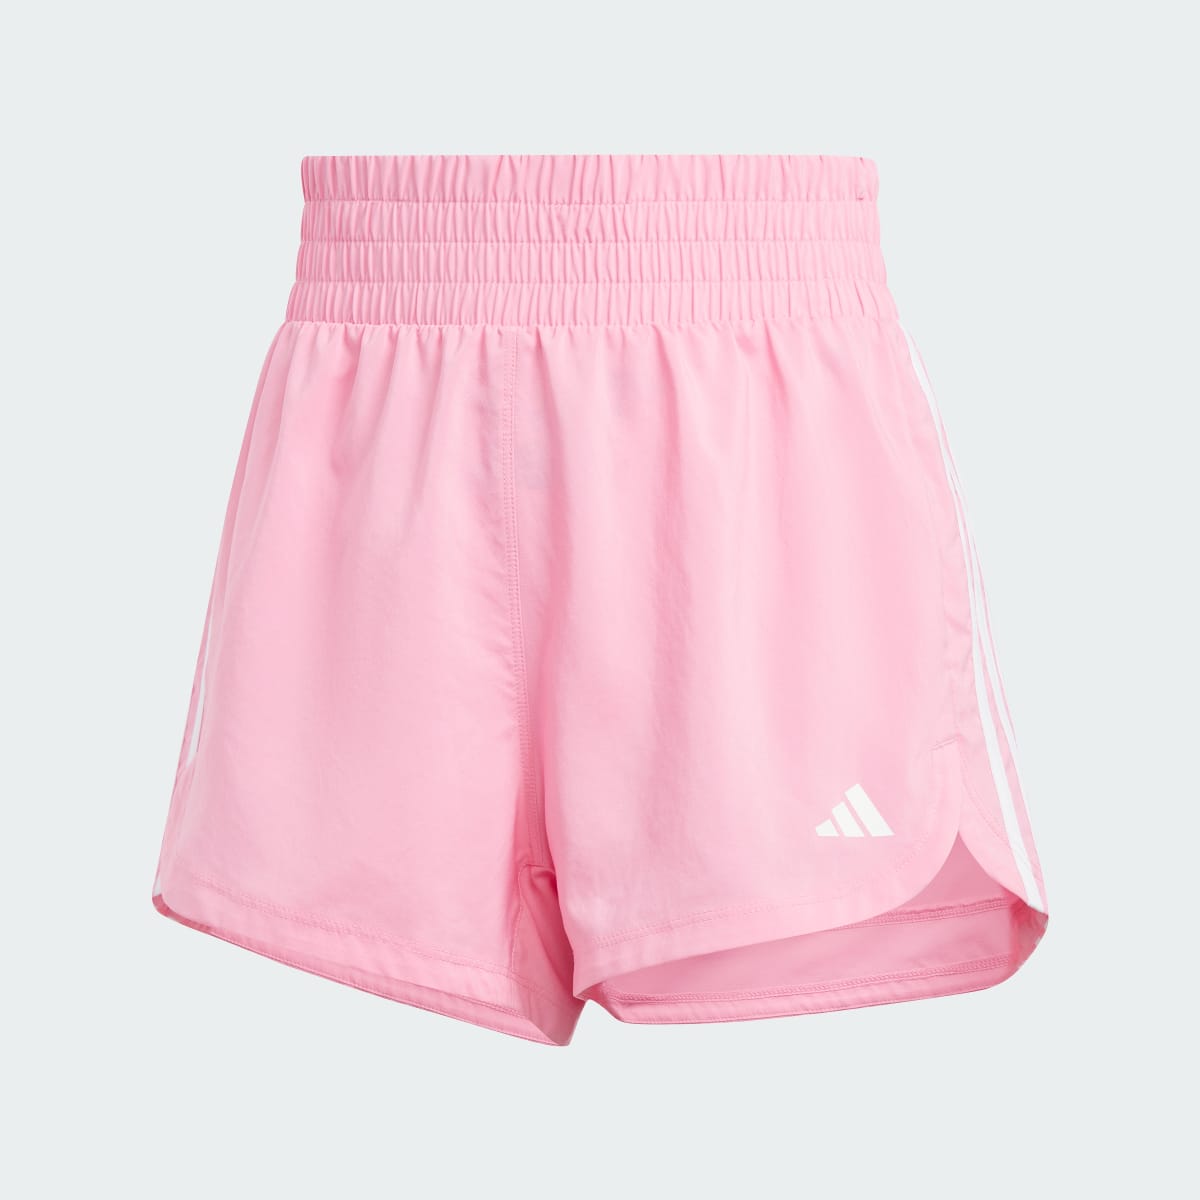 Adidas Pacer Training 3-Stripes Woven High-Rise Shorts. 5